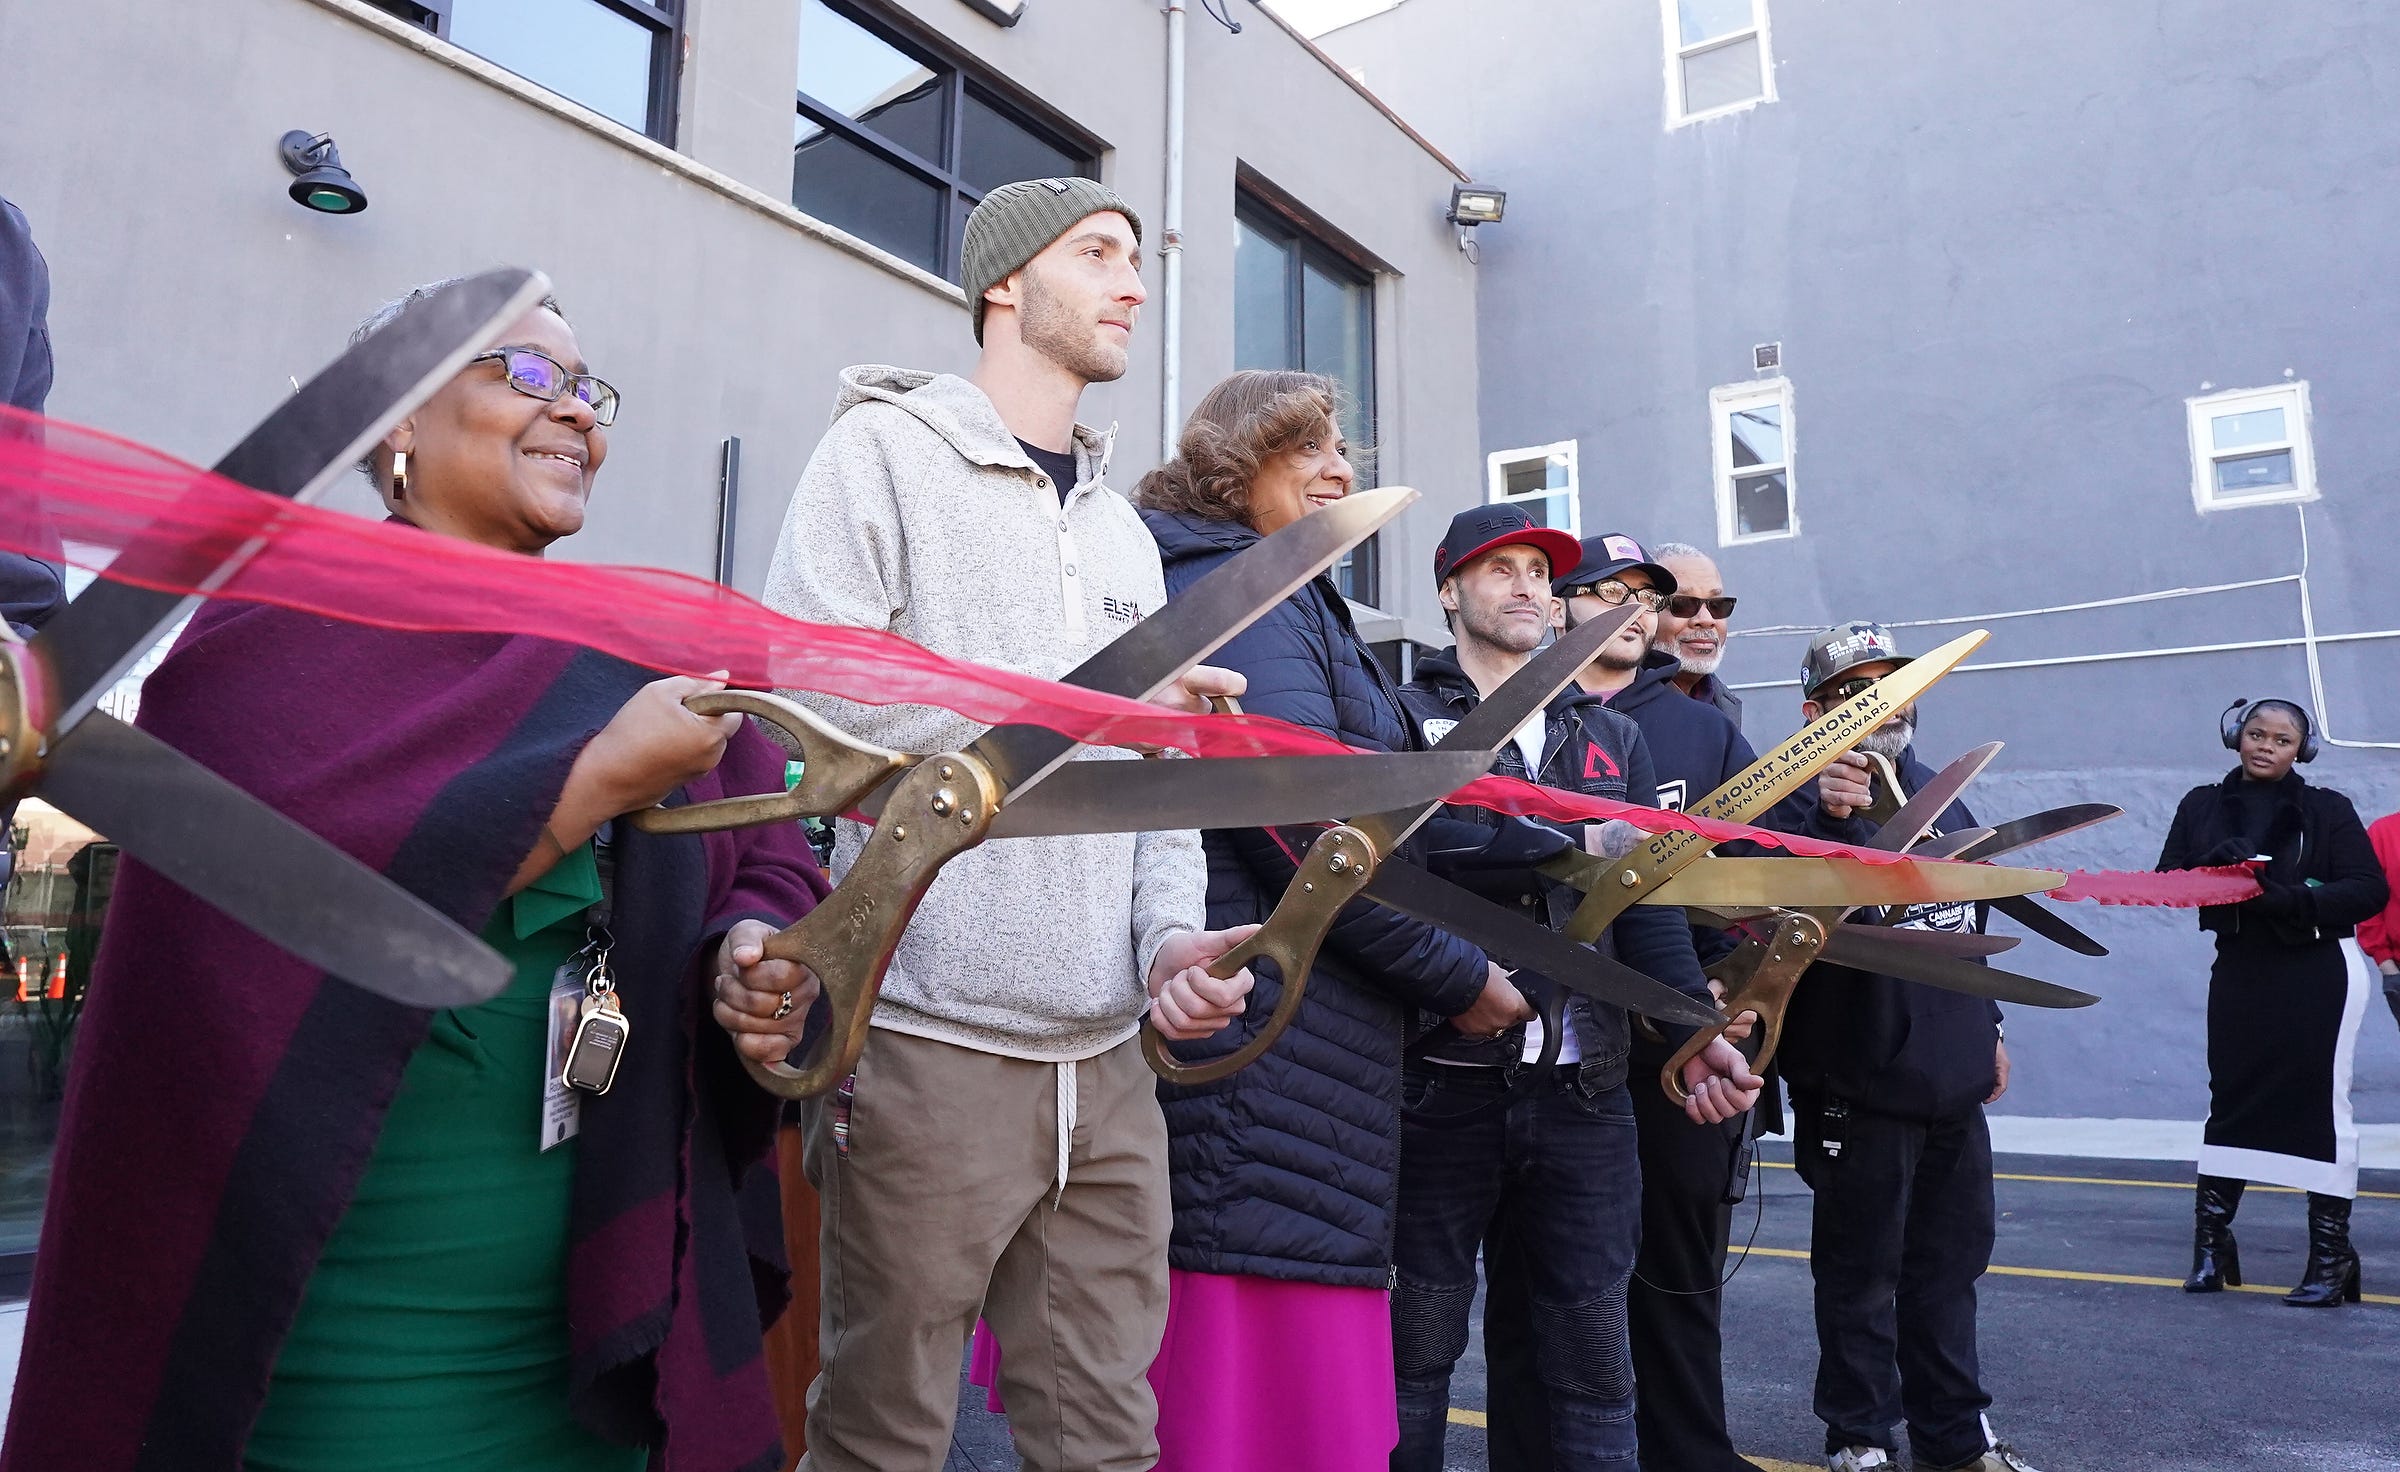 westchester's first cannabis dispensary holds grand opening. see what it looks like